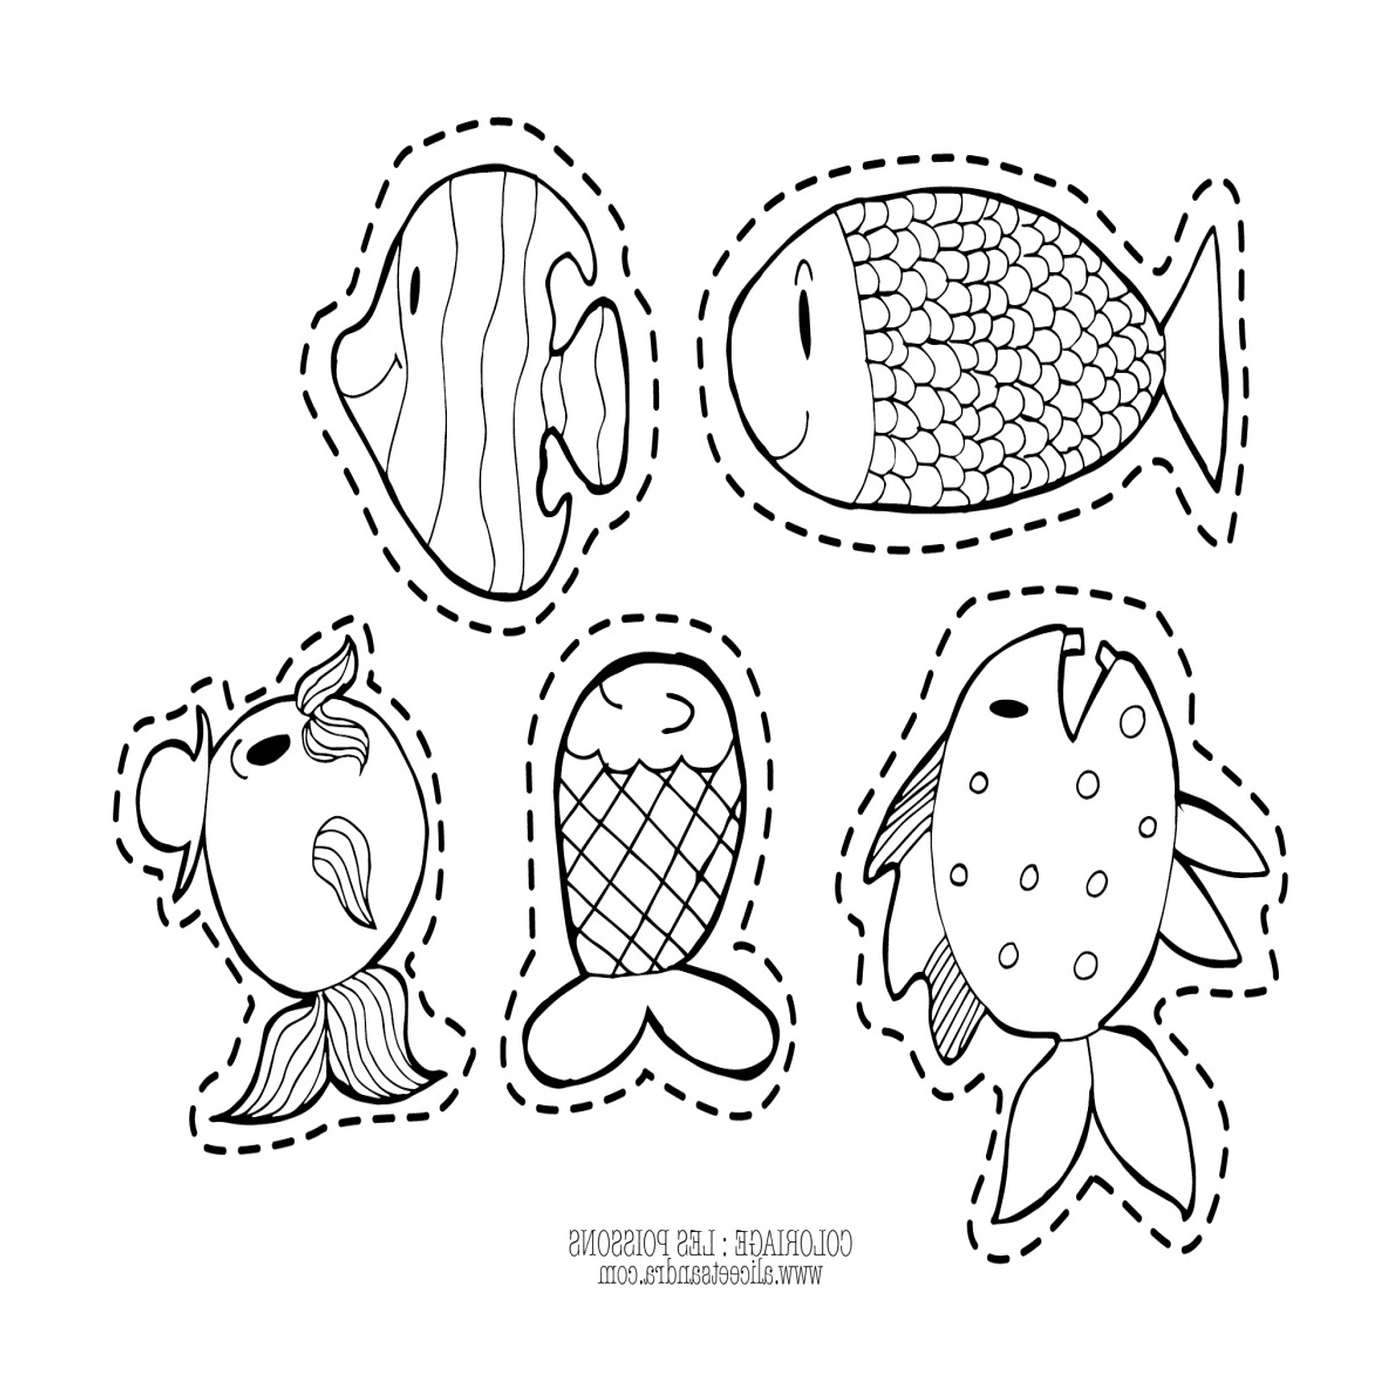  Five fish drawn on one page 